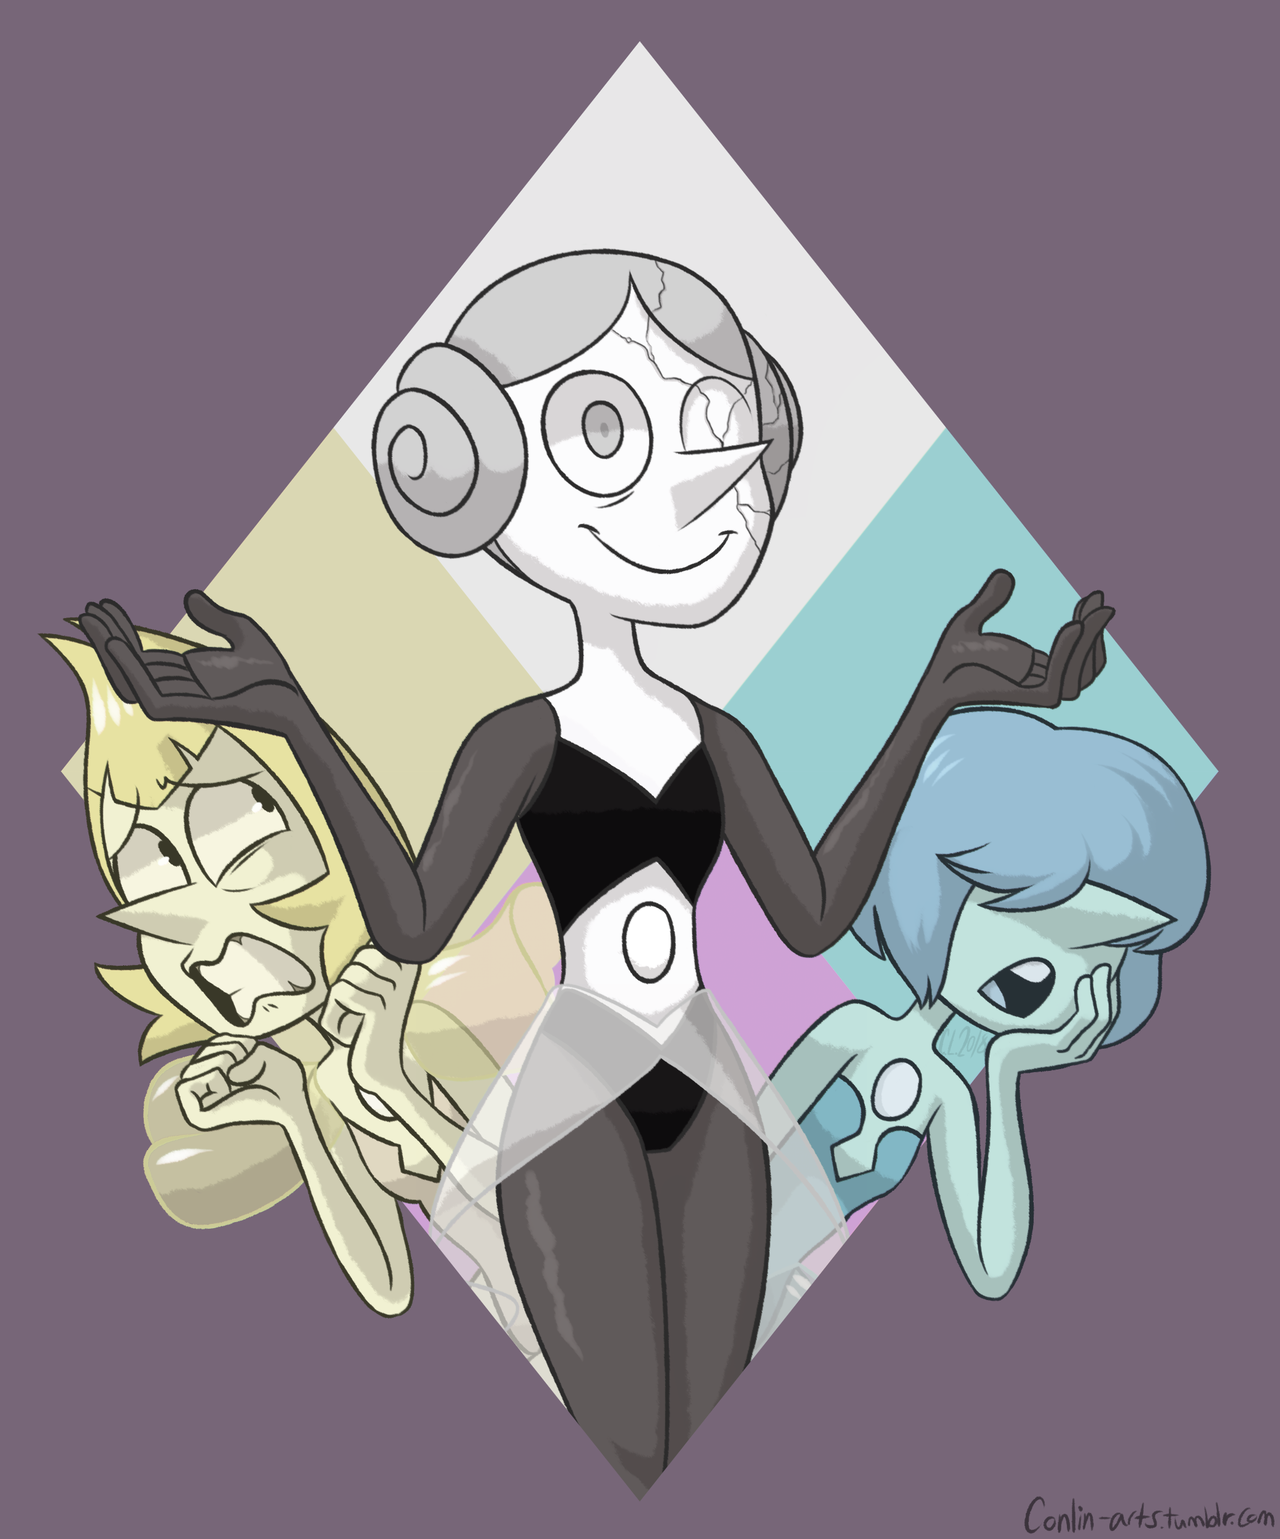 Wanted to draw something silly with the Diamond’s Pearls!